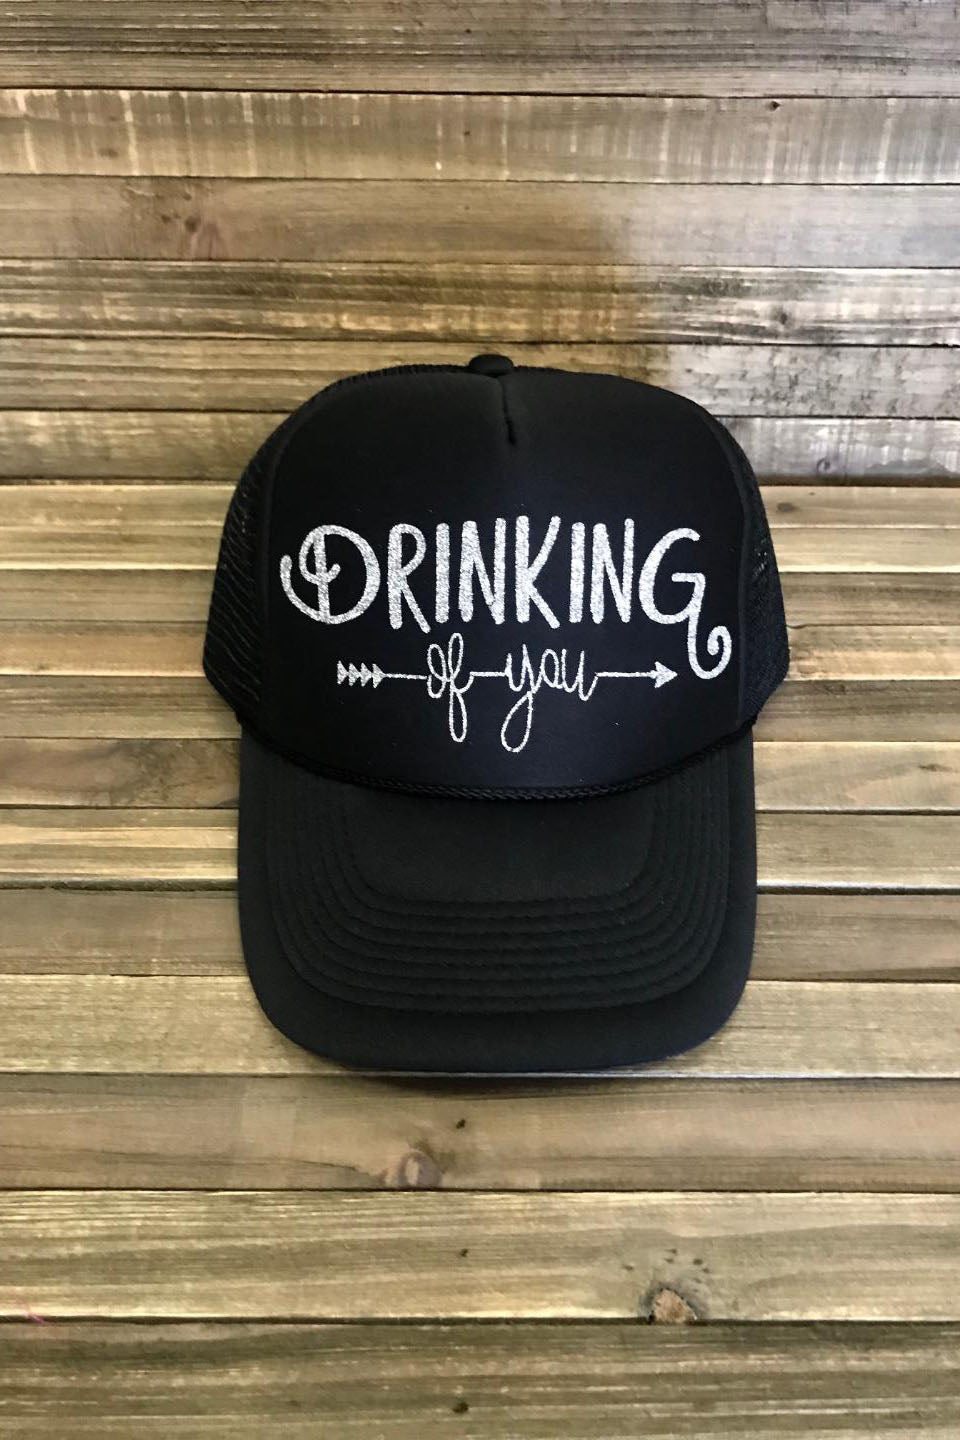 Drinking Of You Mesh Truck Black Hat